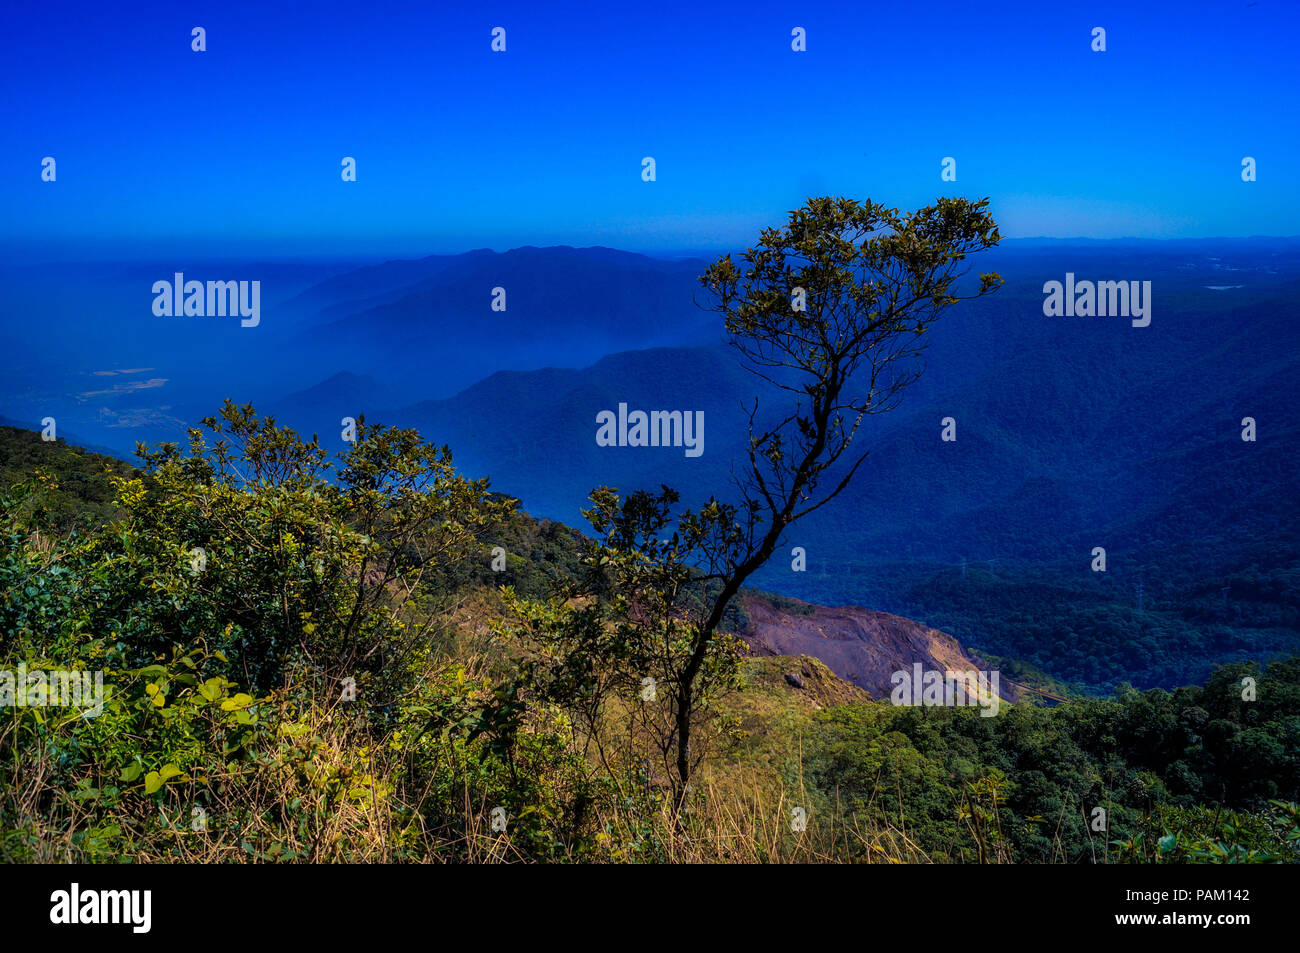 Tree in the blue mountains Stock Photo